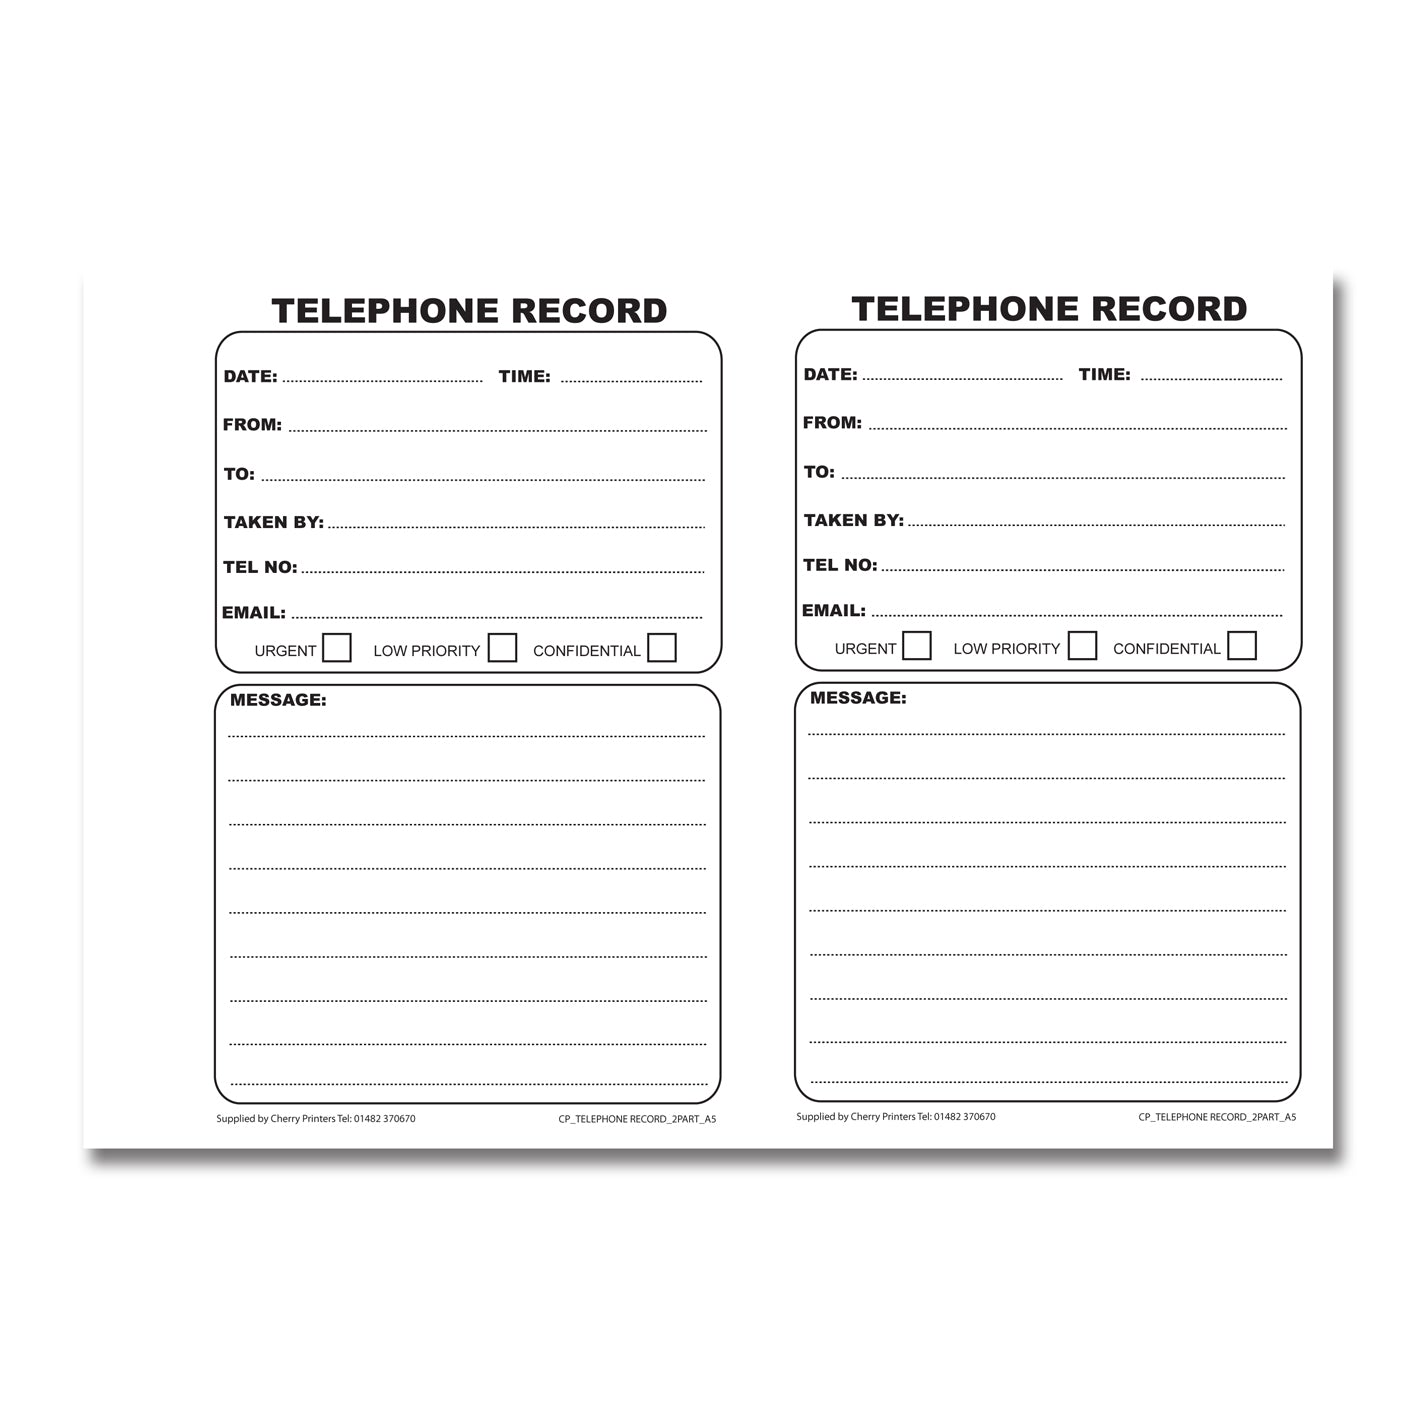 NCR Telephone Record Duplicate Book A5 50 sets 100 records